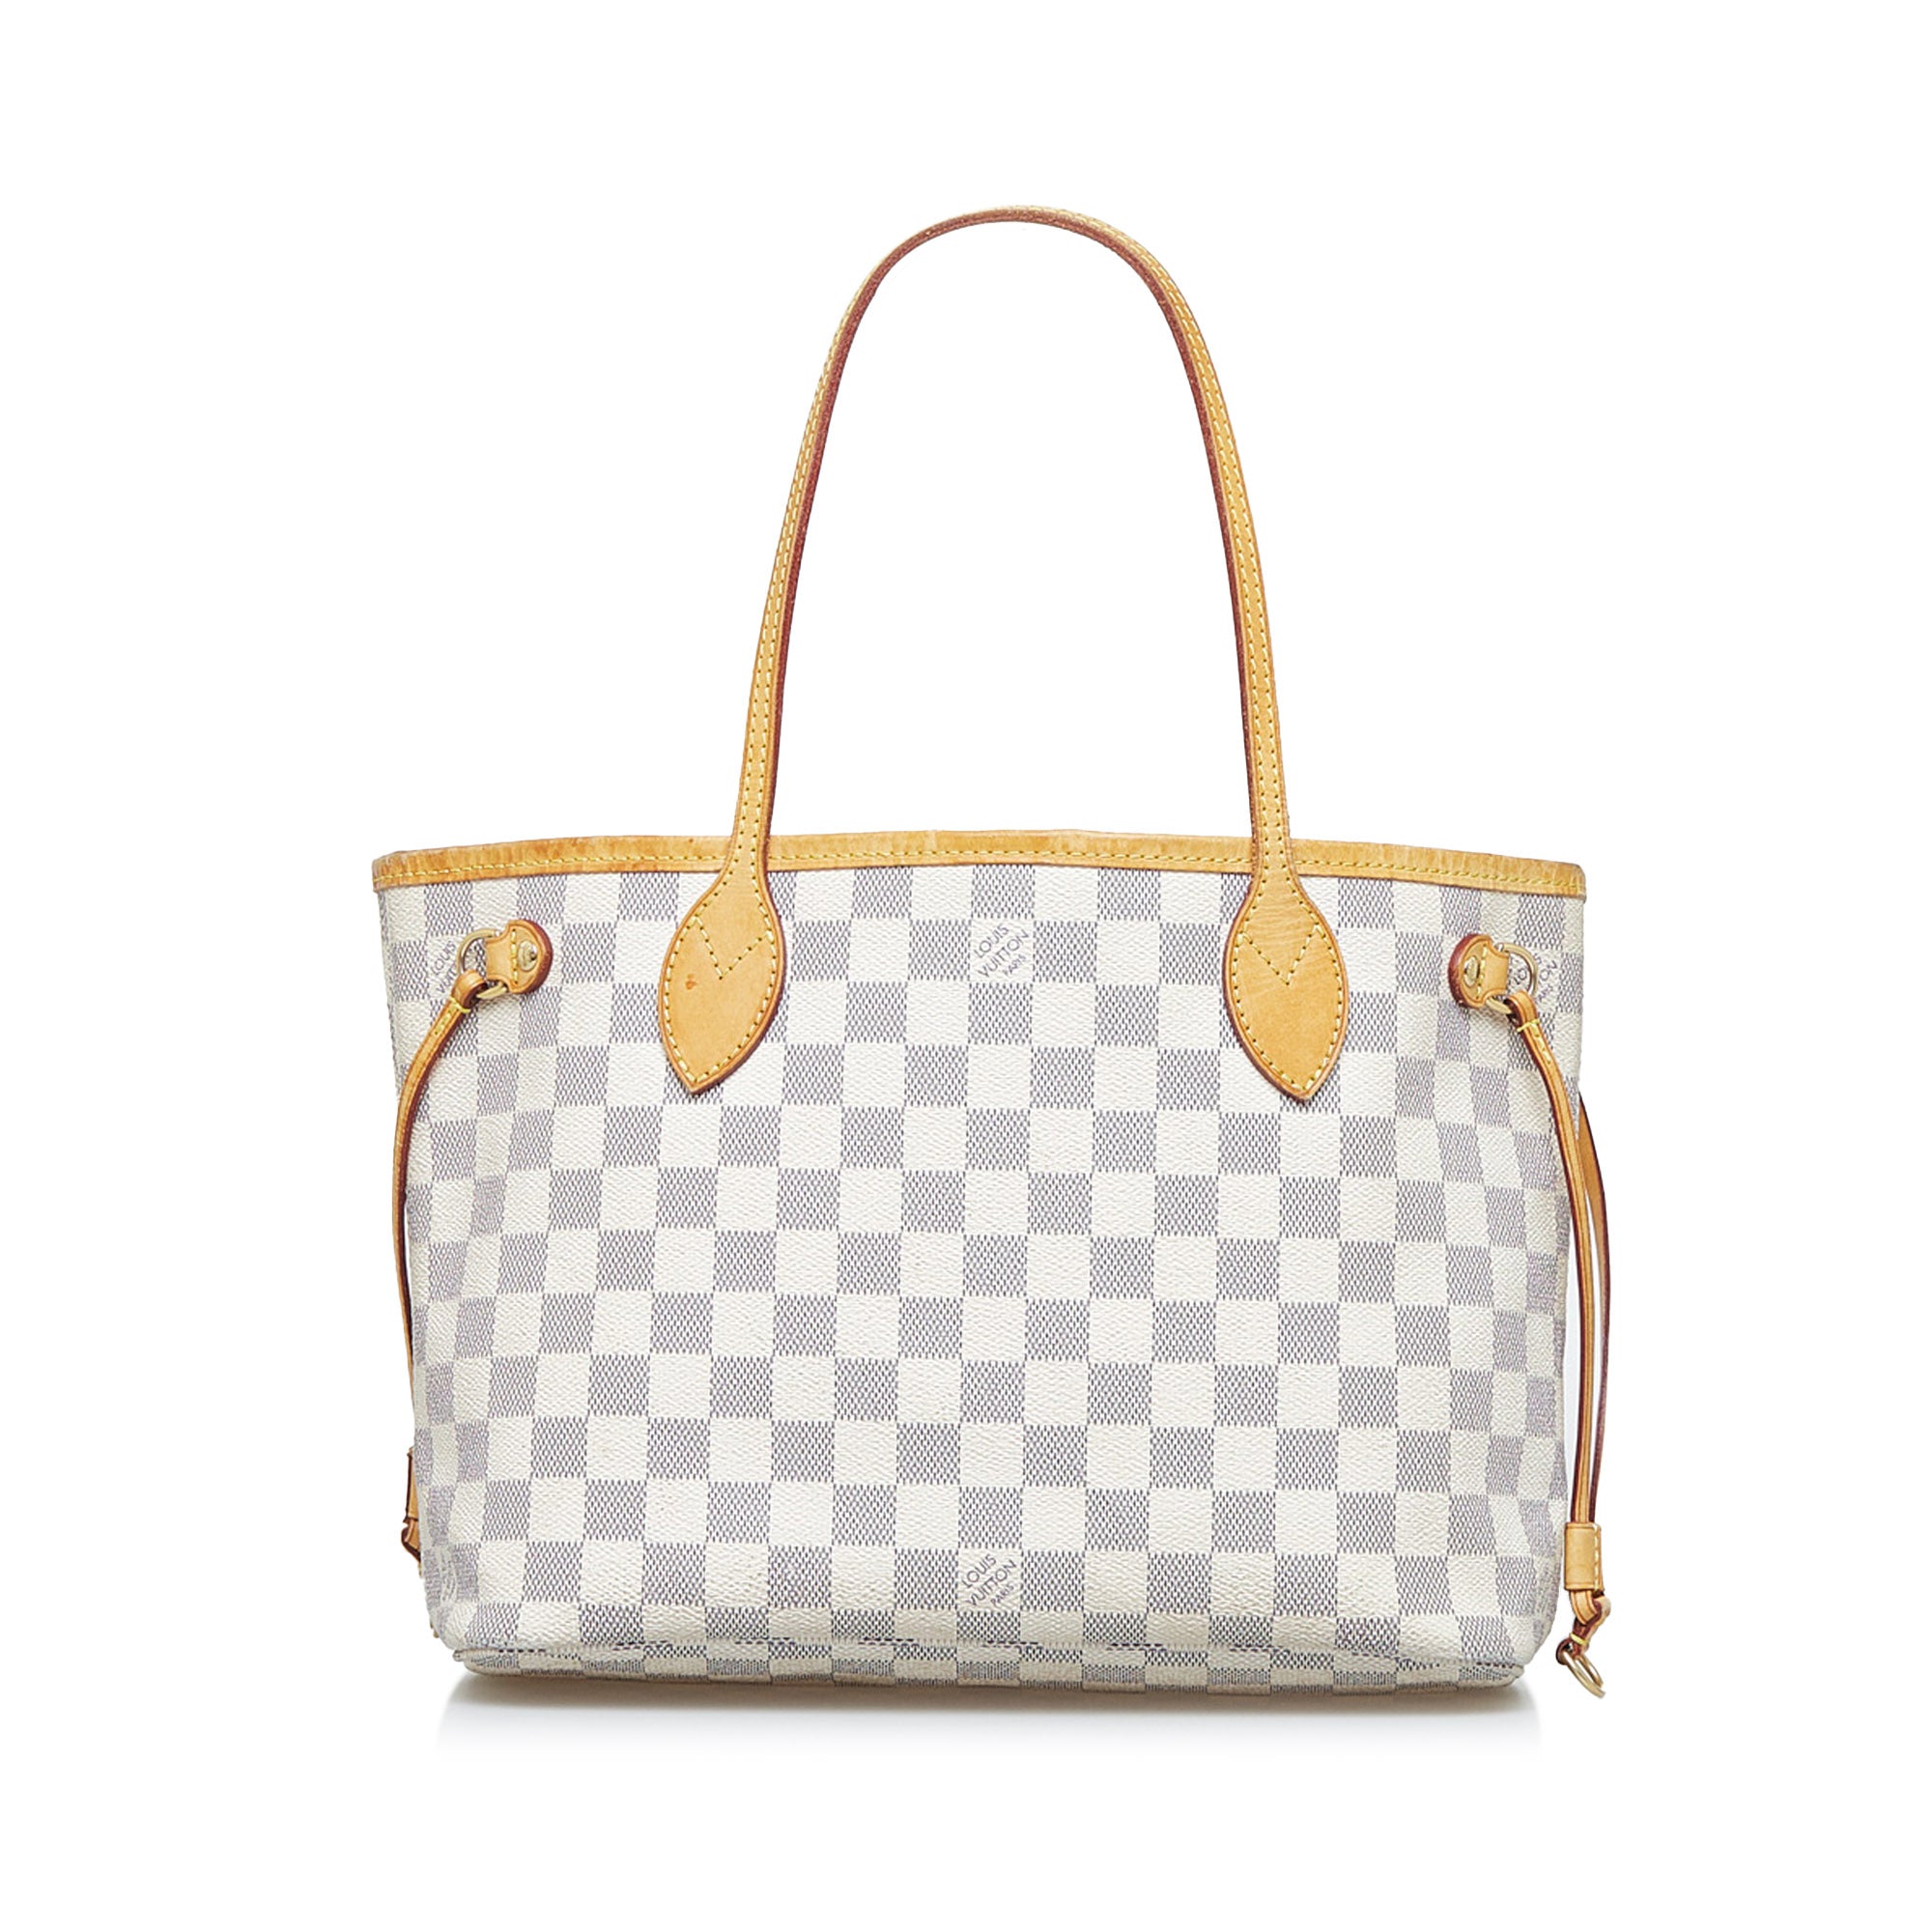 LOUIS VUITTON NEVERFULL GM - MONOGRAM For parts or not working